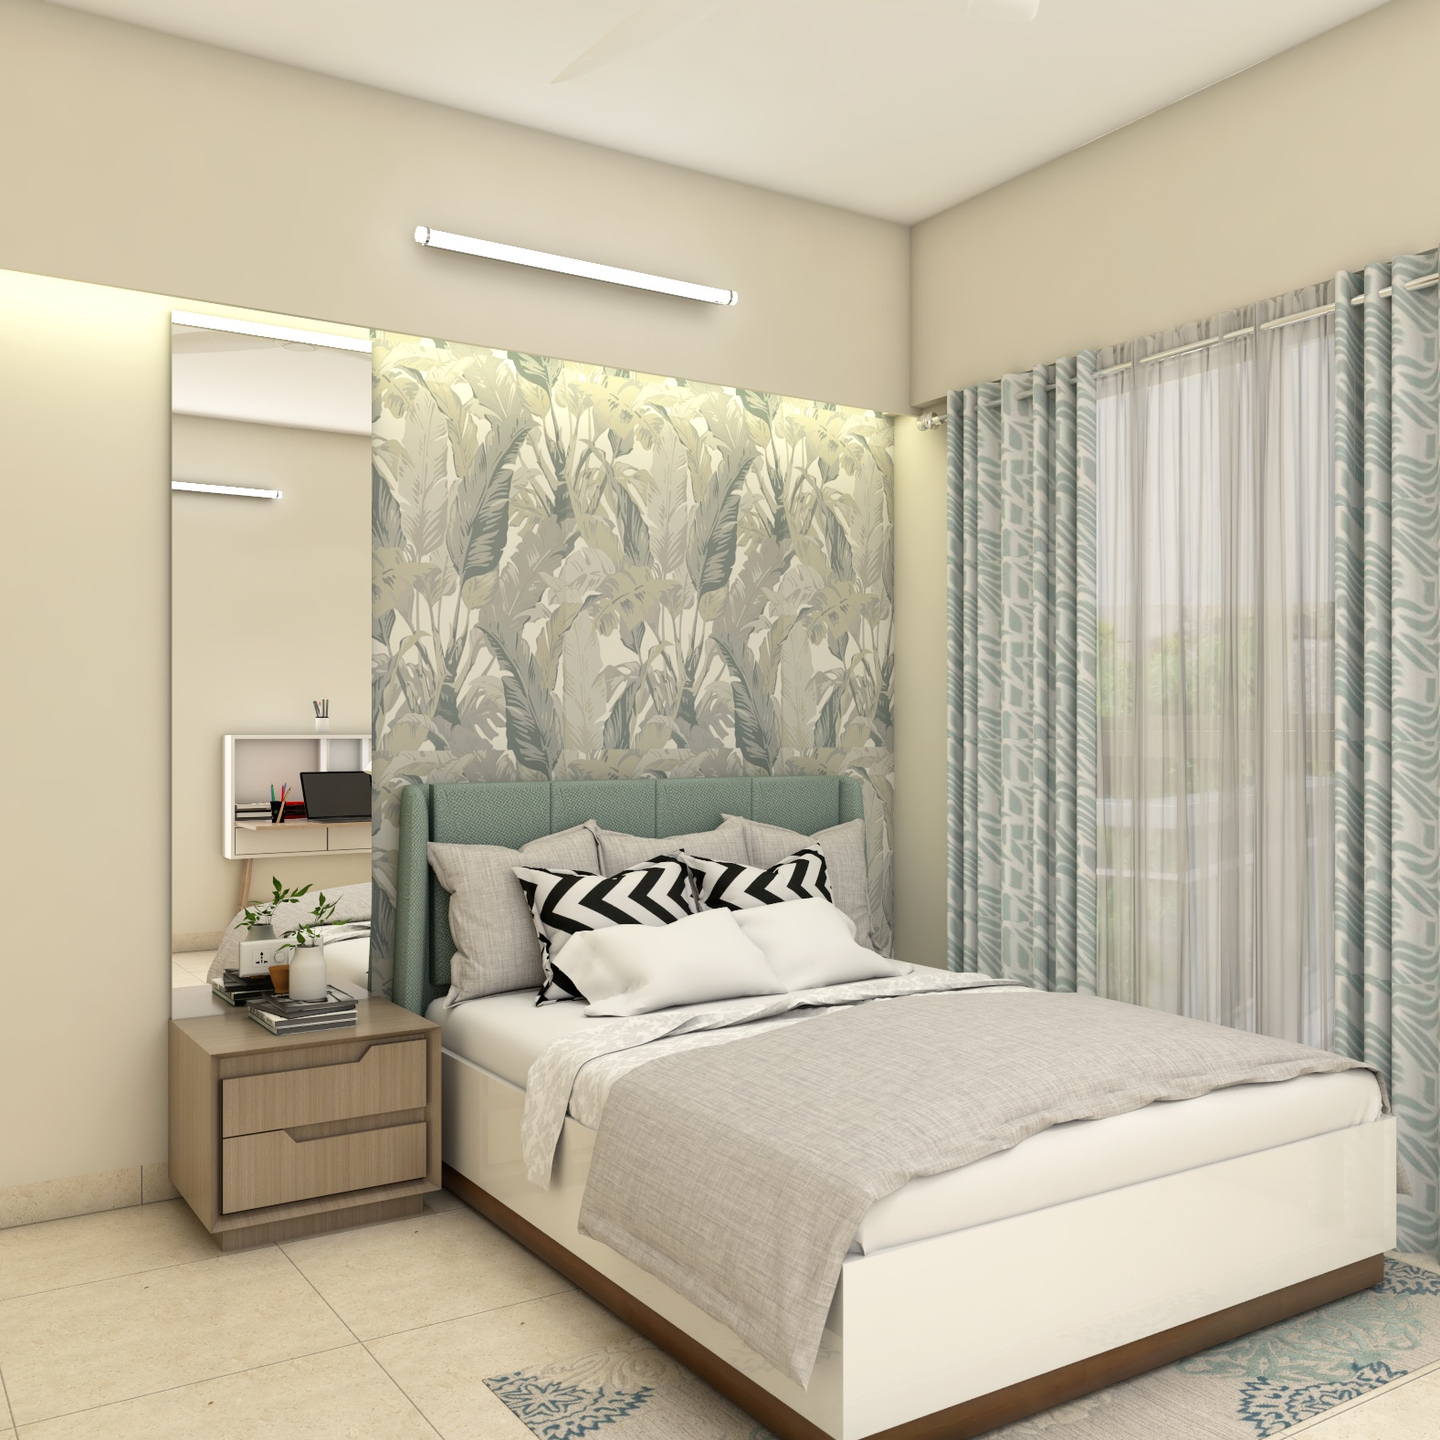 Contemporary Guest Room Design With Pastel Green And Grey Themes